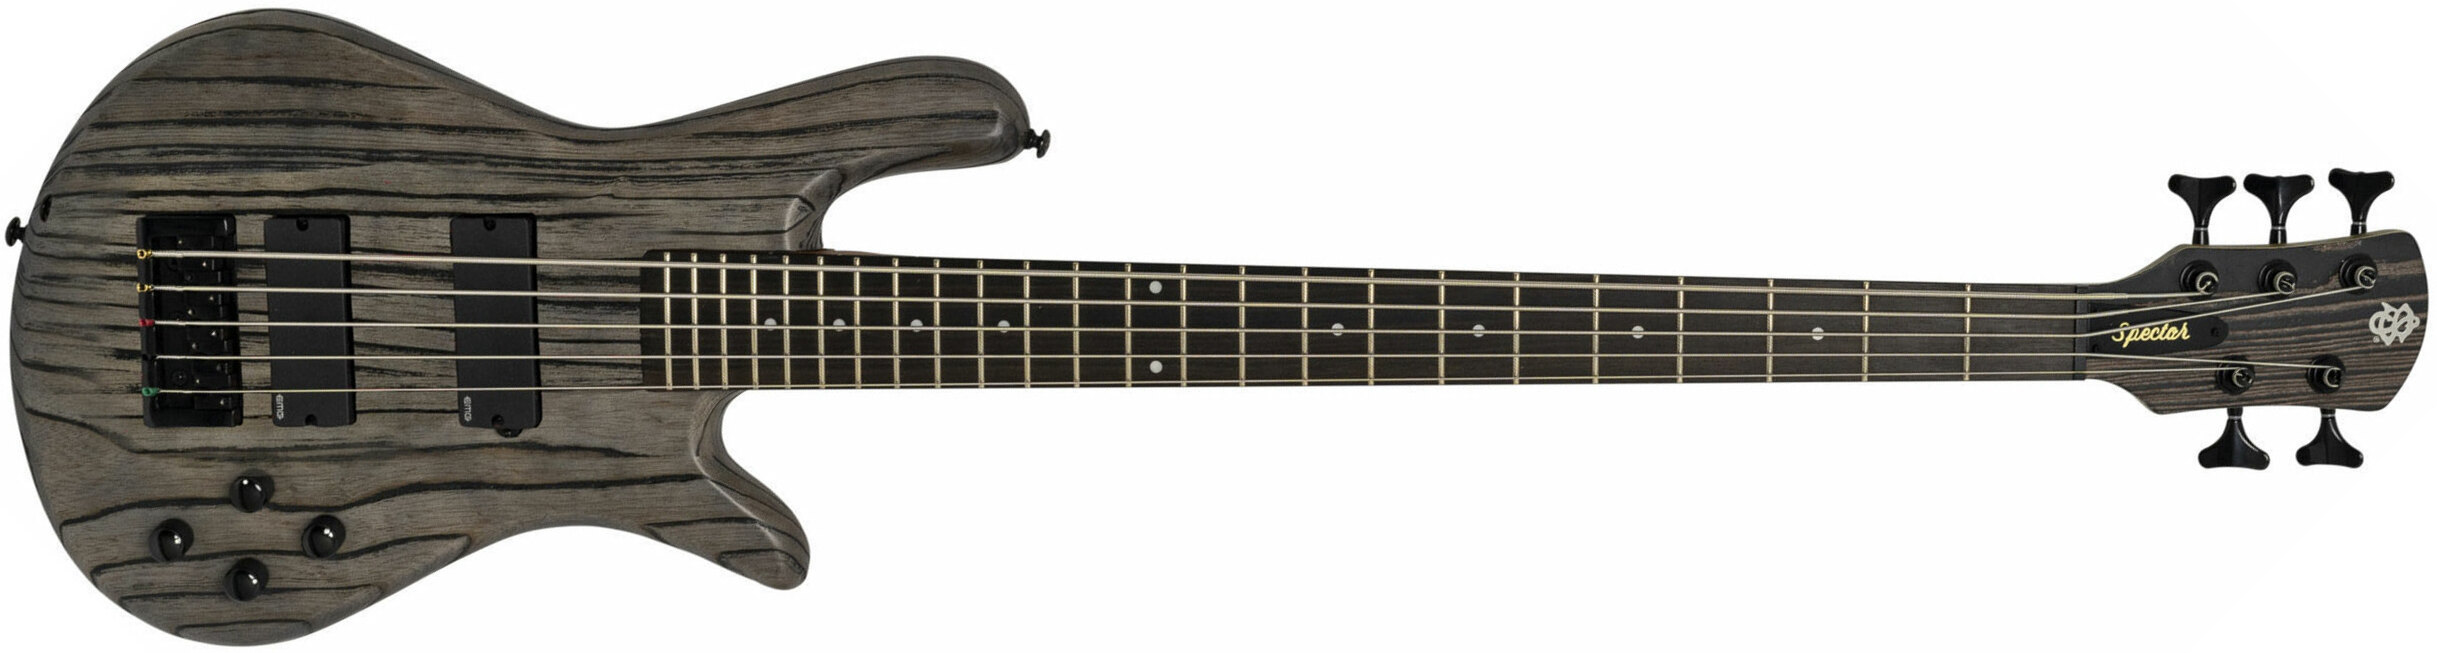 Spector Ns Pulse I 5c Active Emg Eb - Charcoal Grey - Basse Électrique Solid Body - Main picture